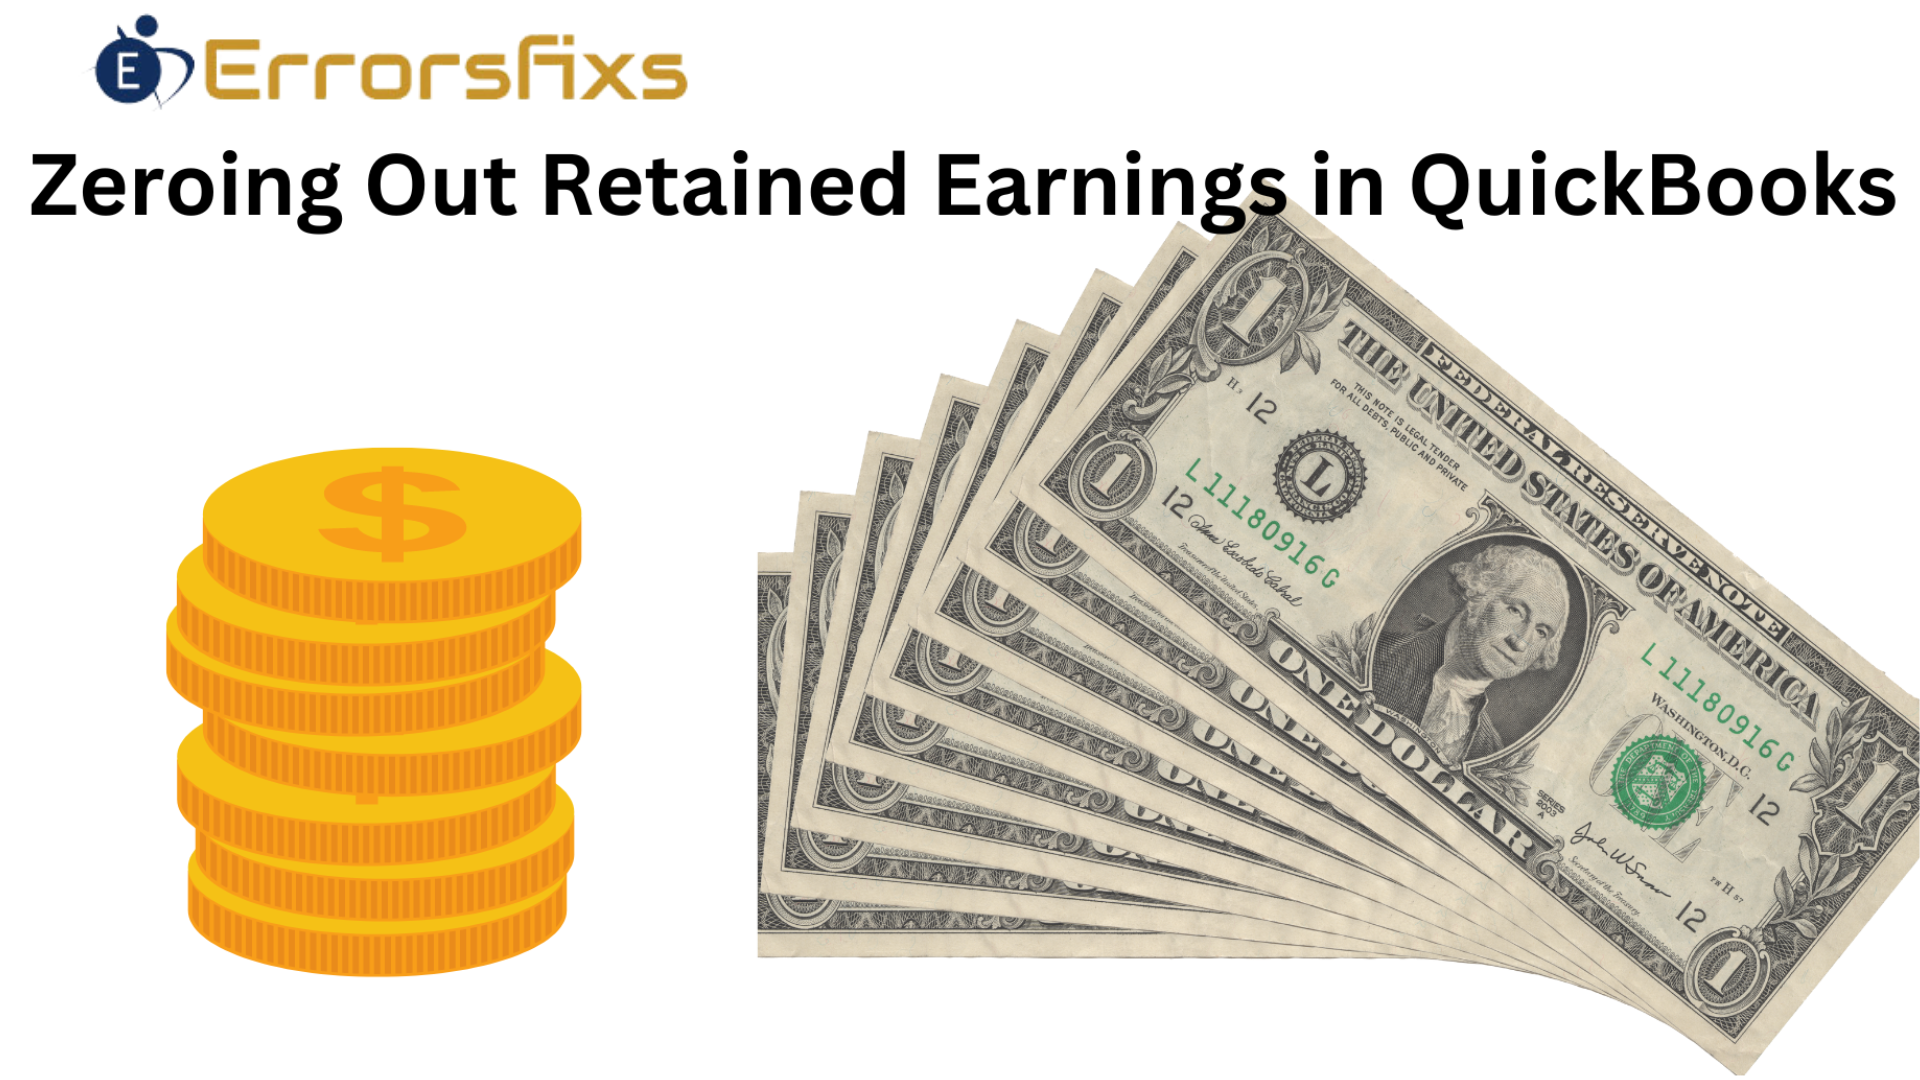 Guidelines for Zeroing Out Retained Earnings in QuickBooks